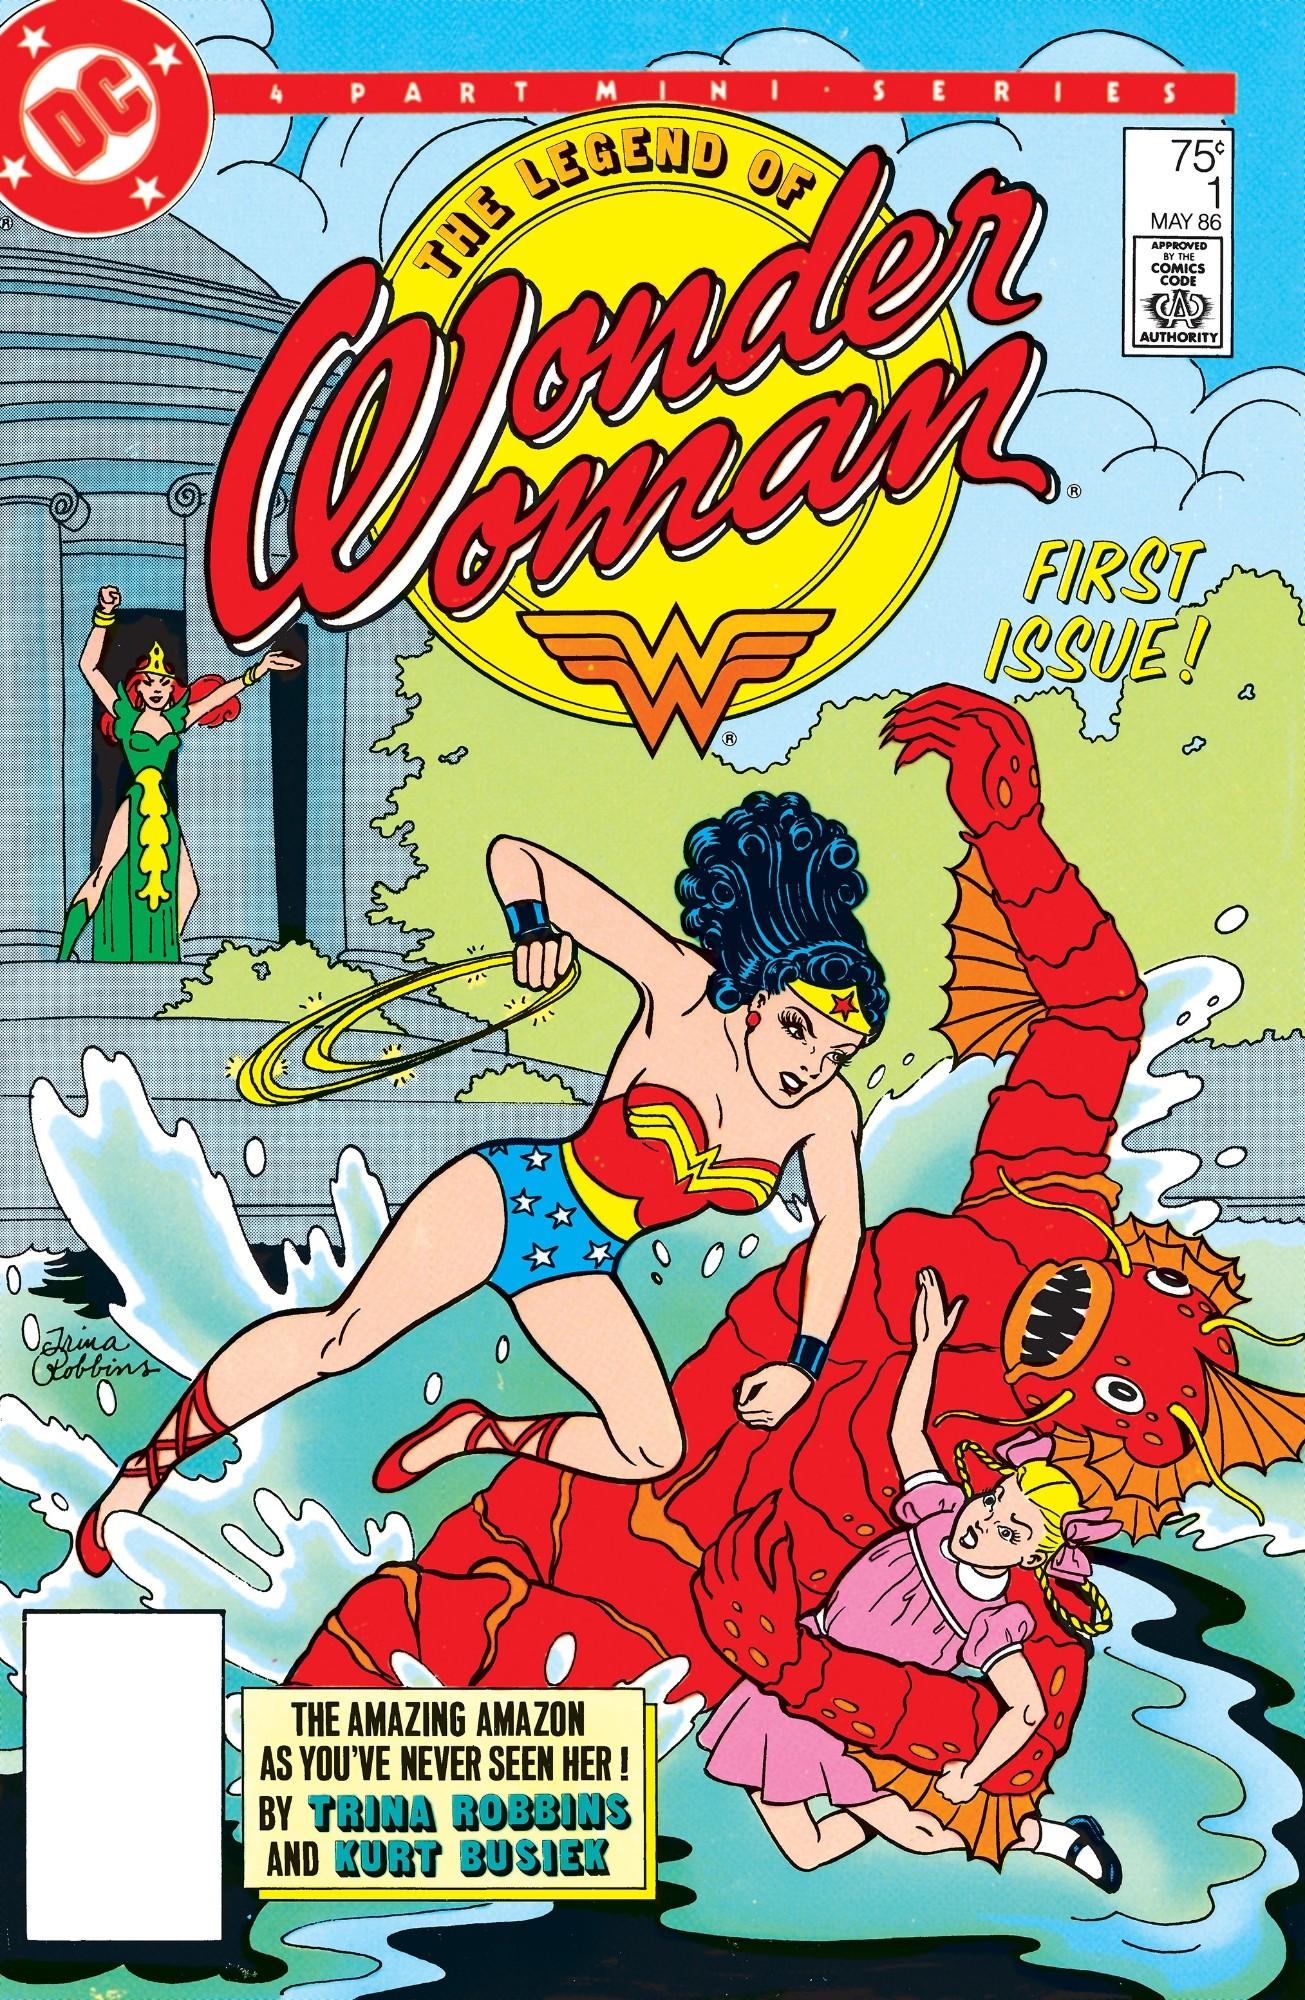 The Real-Life Wonder Woman of Comics Herstory | Art & Object